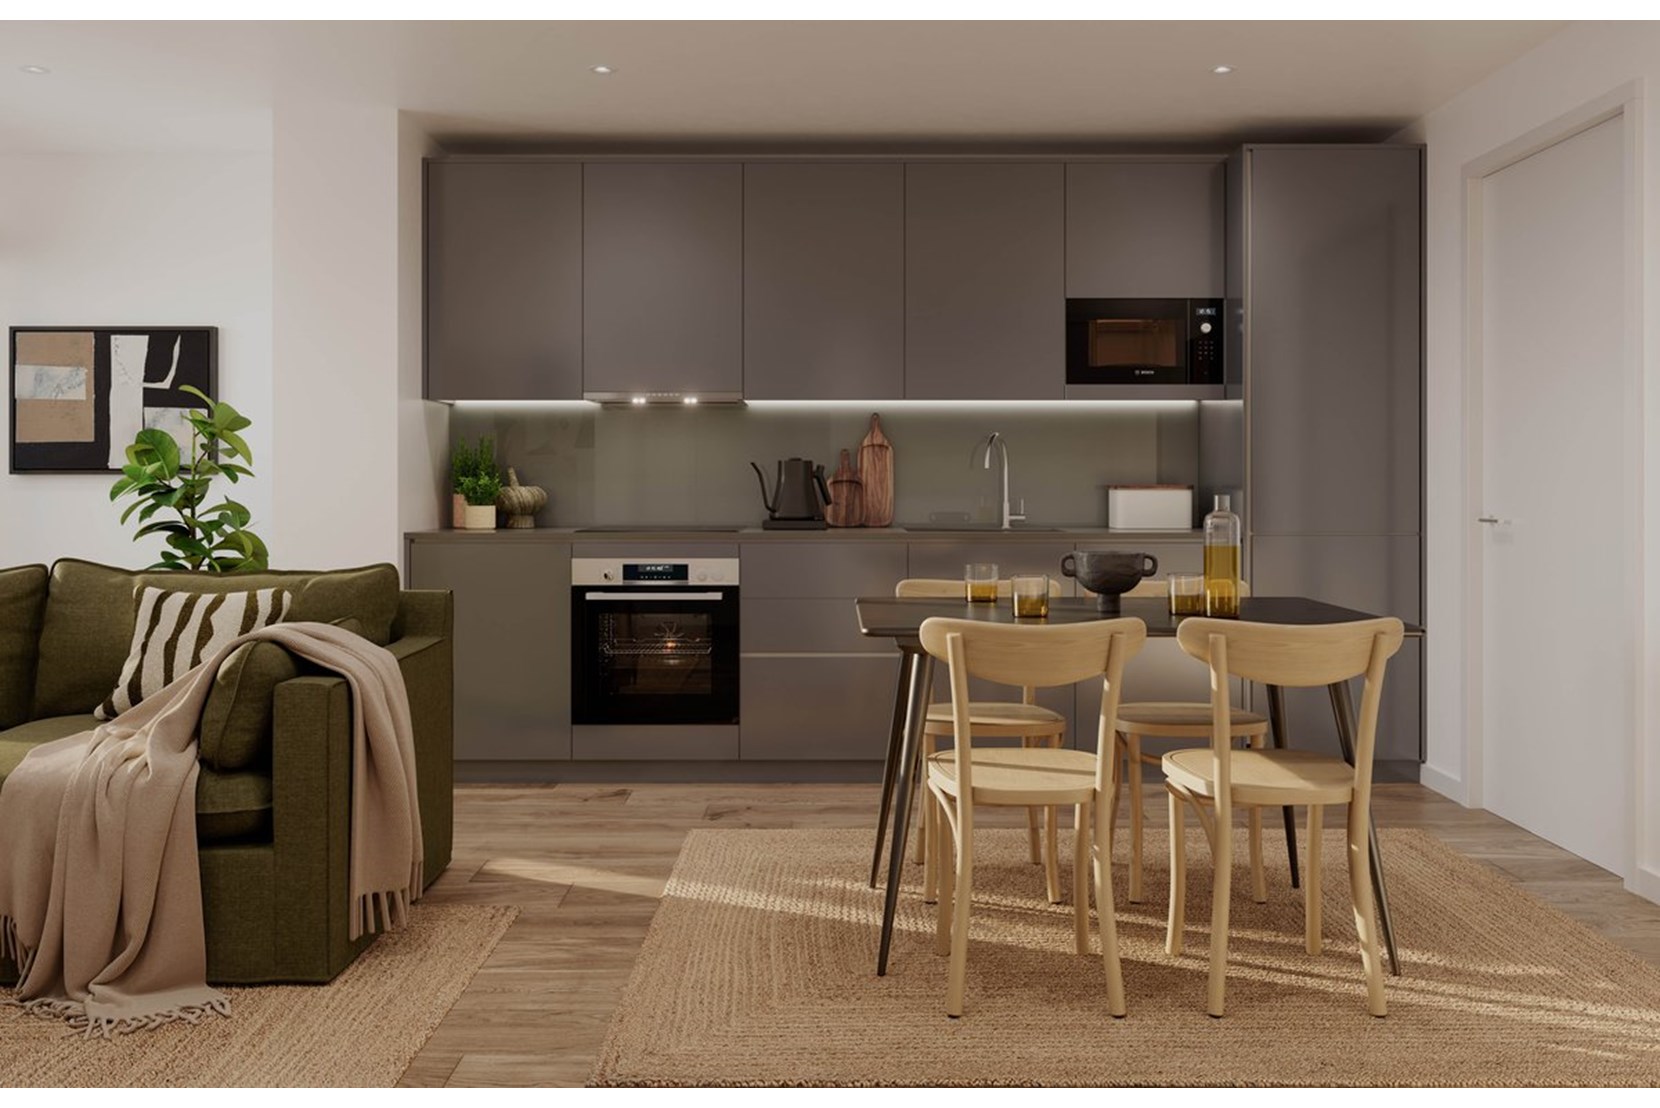 Apartments to Rent by Way of Life in Riverstone Heights, Bromley-by-Bow, E3, kitchen dining area